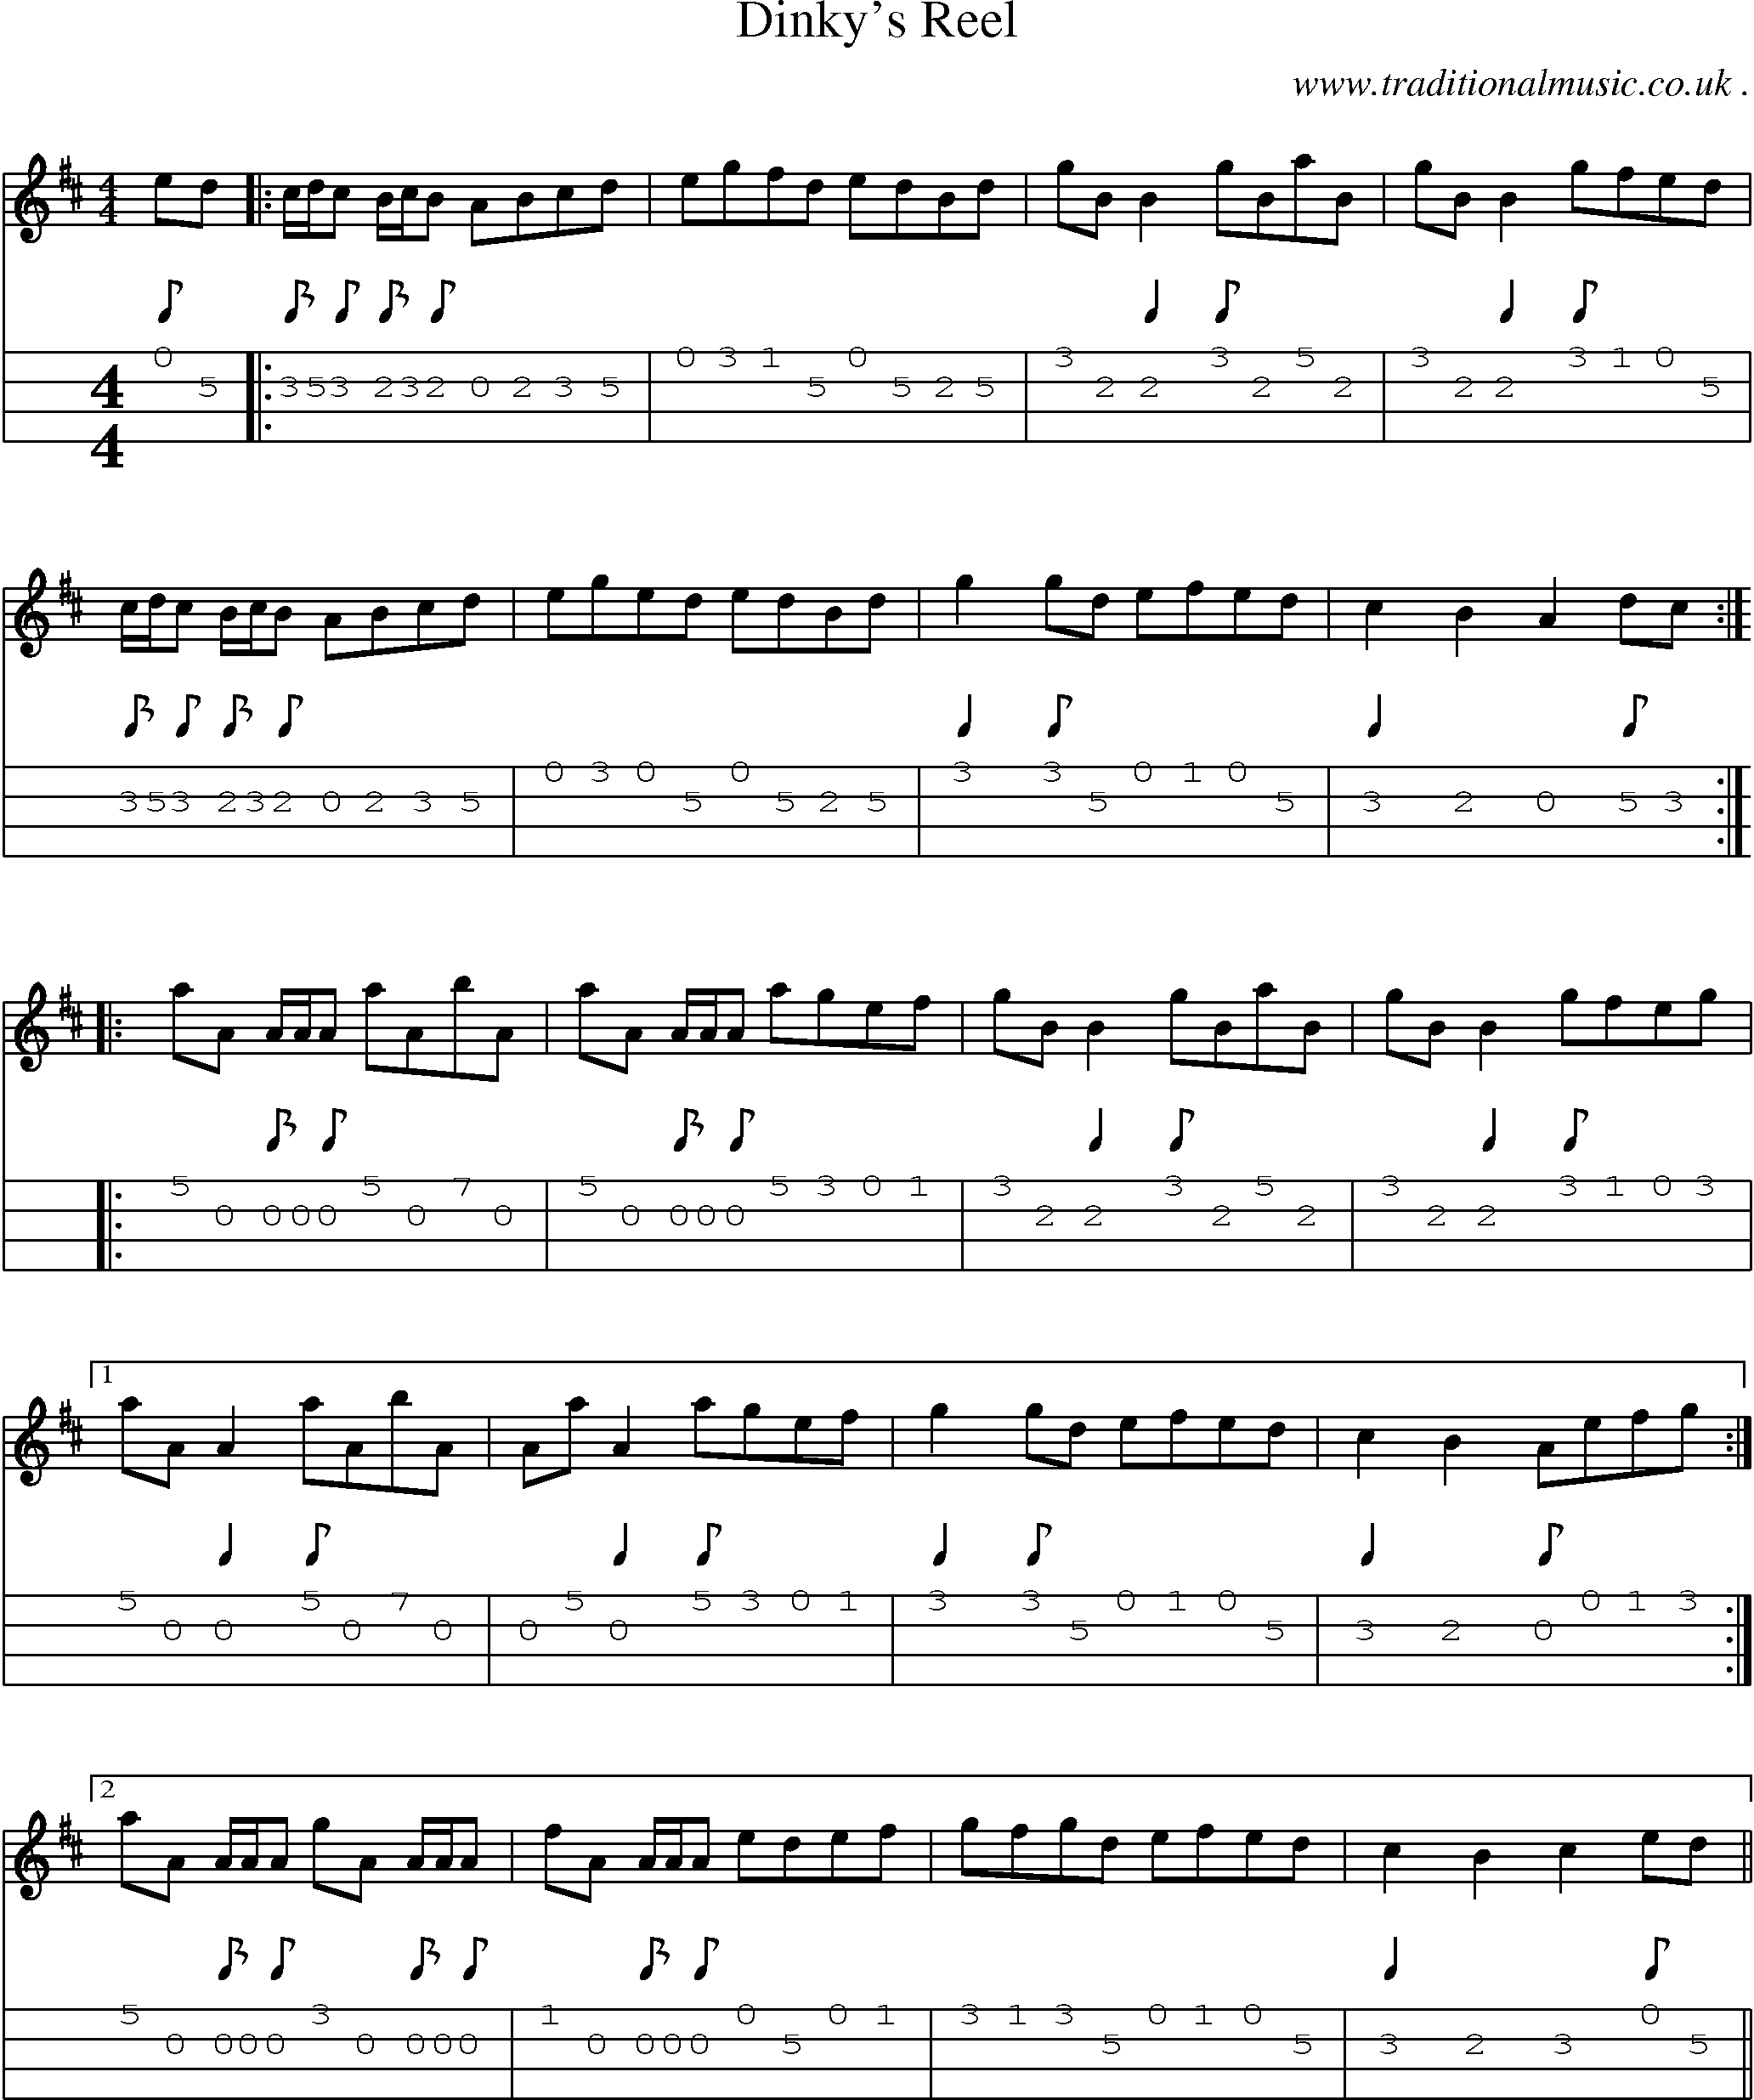 Sheet-Music and Mandolin Tabs for Dinkys Reel